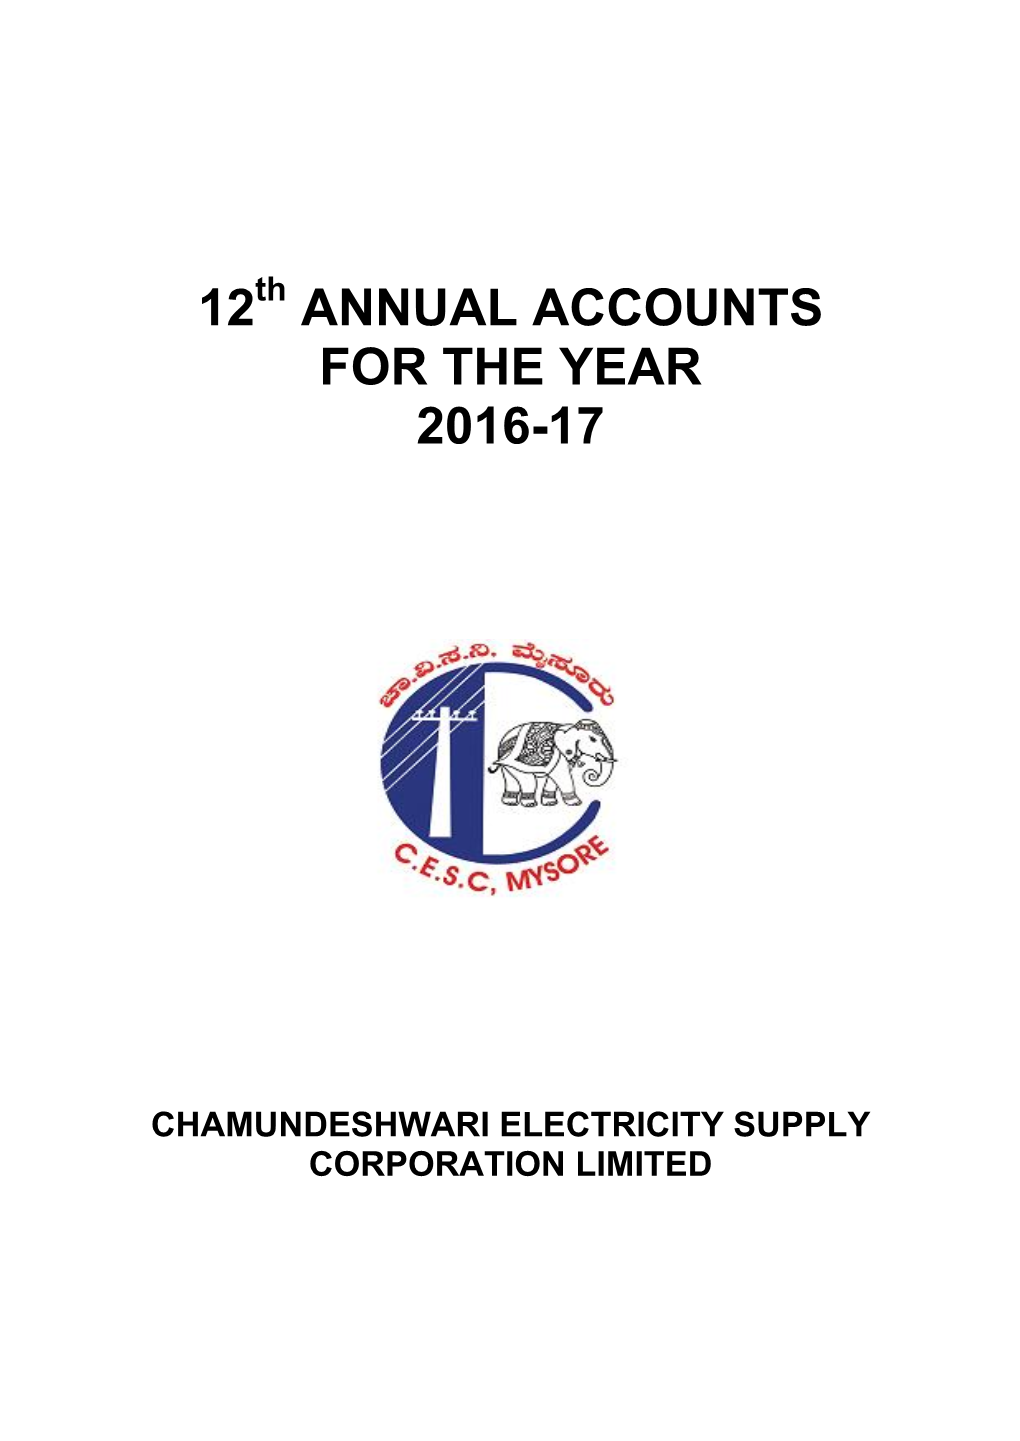 Director's Report for the Year 2010